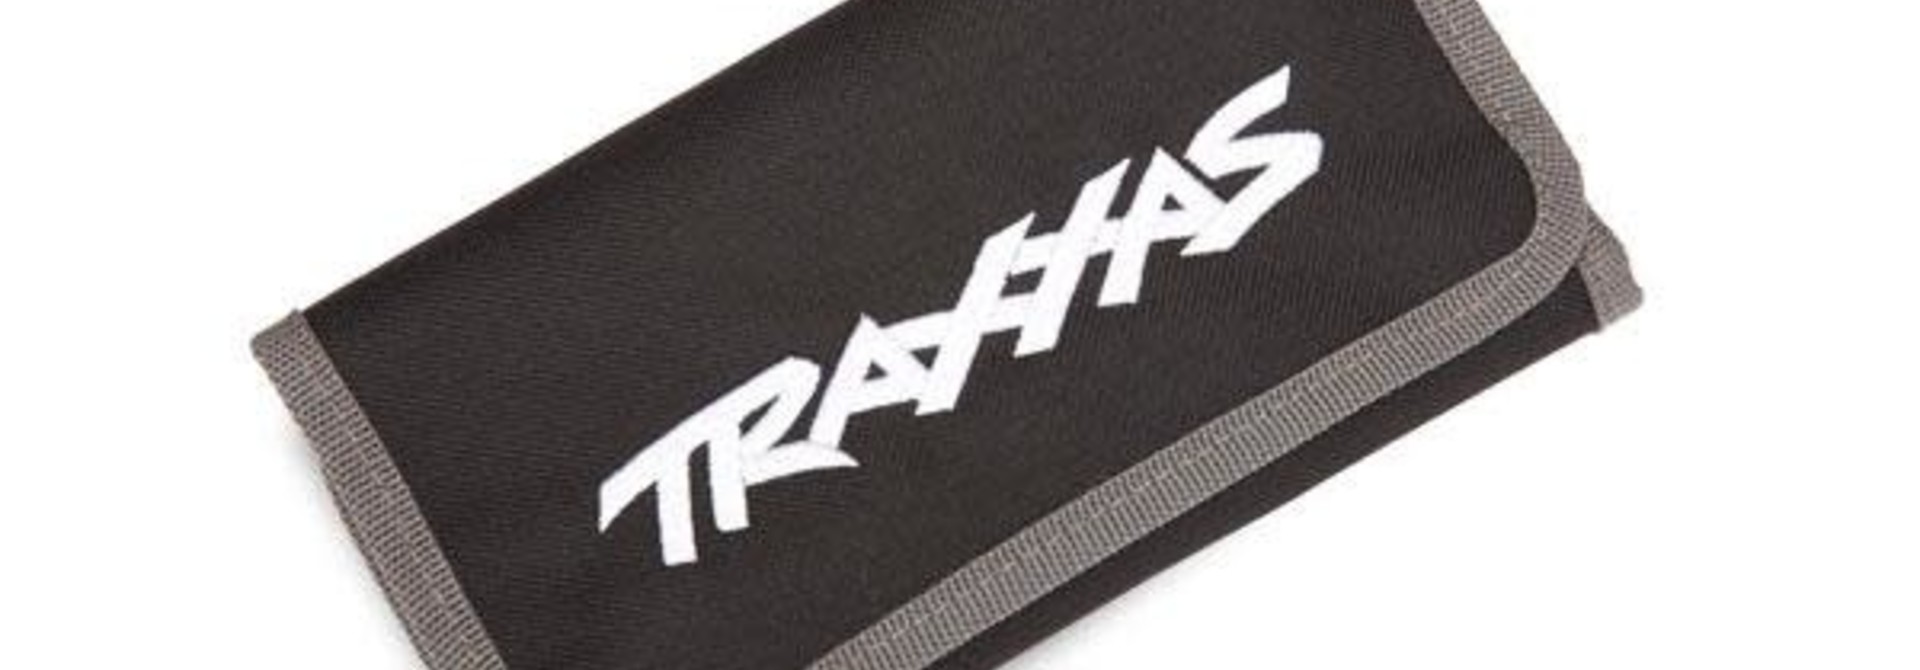 Tool pouch, black (custom embroidered with Traxxas logo)